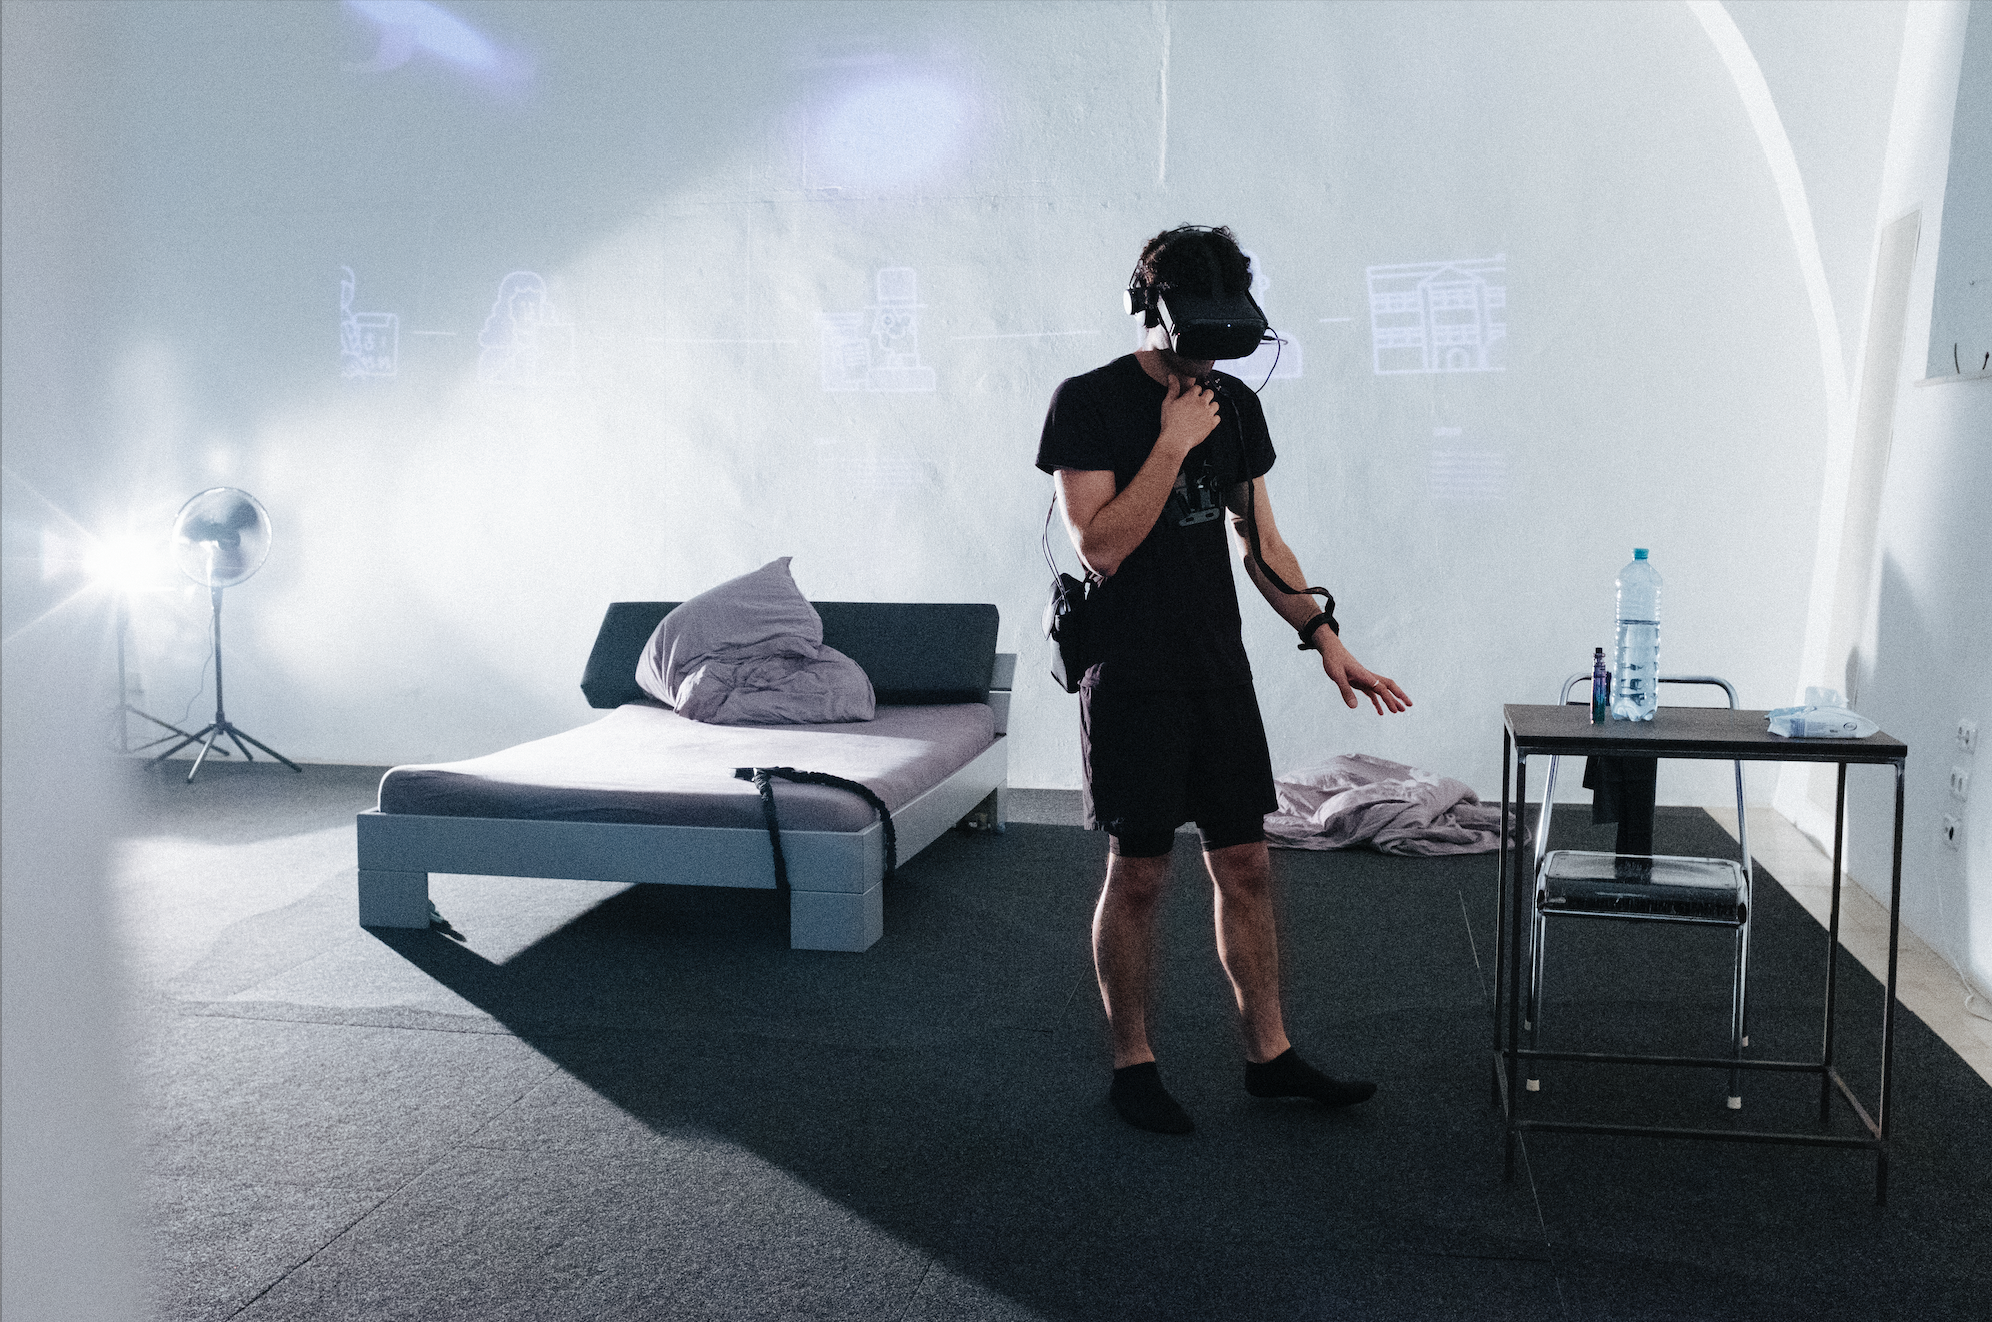 Mark Farid, Seeing I, 2019. Installation view, Ars Electronica, Linz. Image: Mila Lewis.